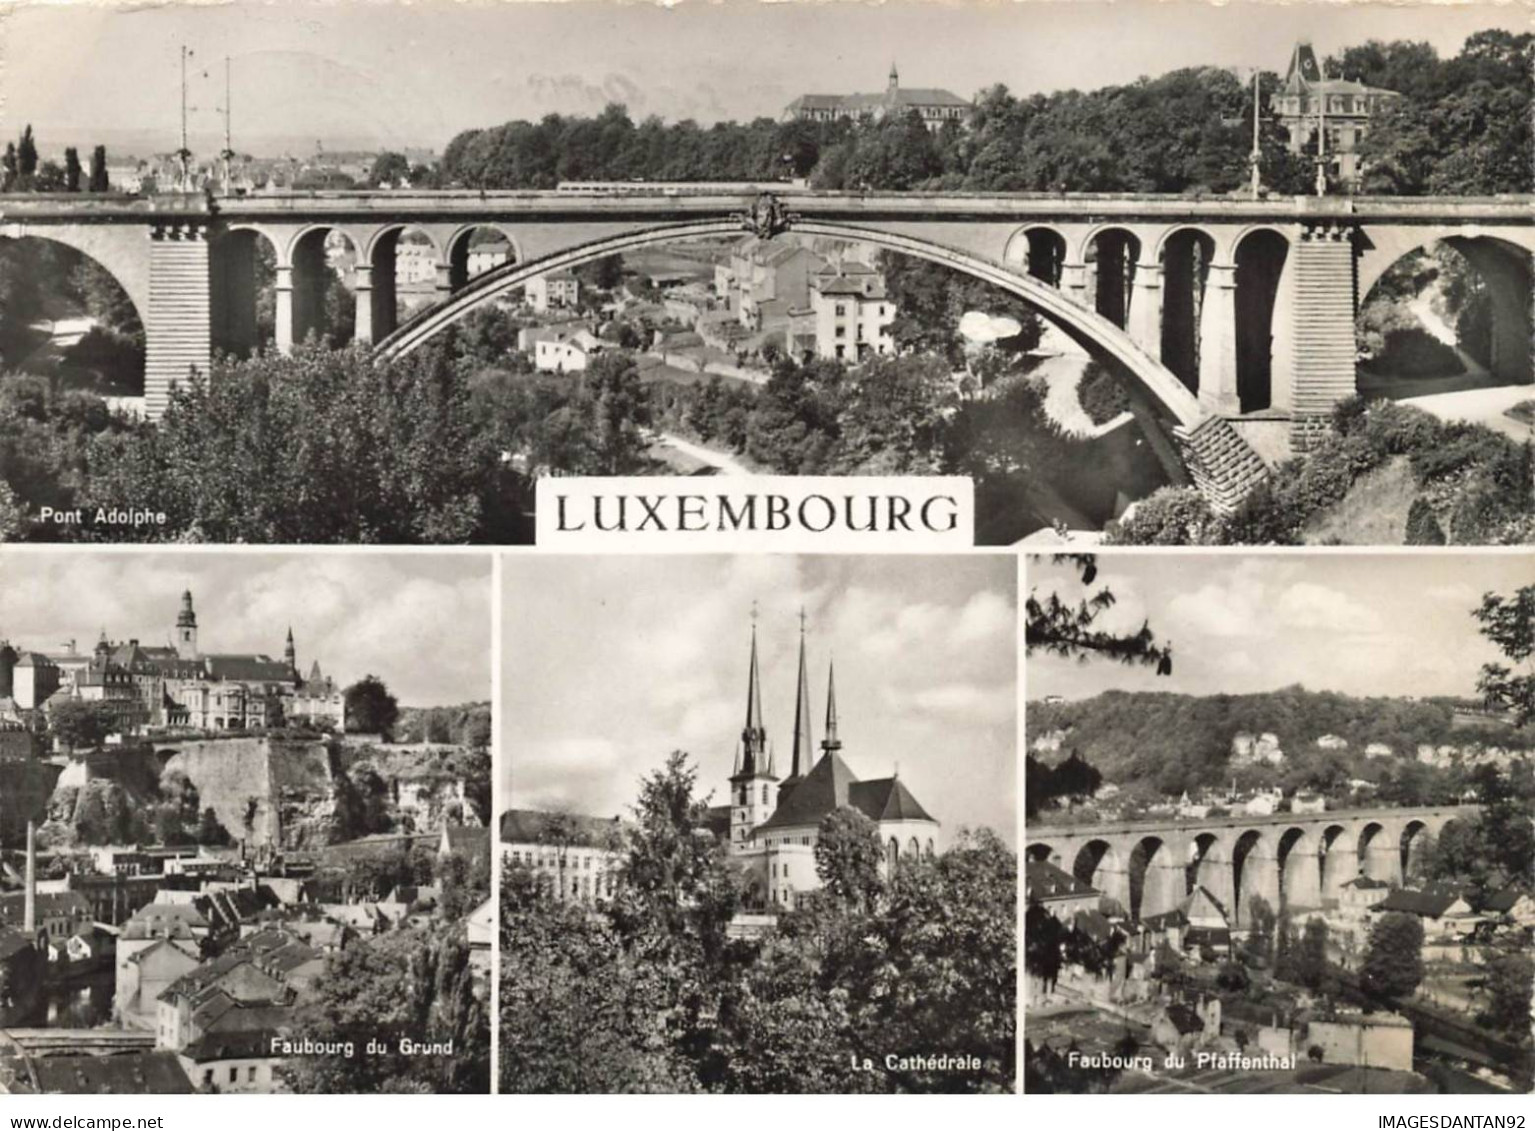 LUXEMBOURG #AS31466 LUXEMBOURG PONT ADOLPHE FAUBOURG DE PFAFFENTHAL LA CATHEDRALE FAUBOURG DU GRUND - Luxemburg - Town